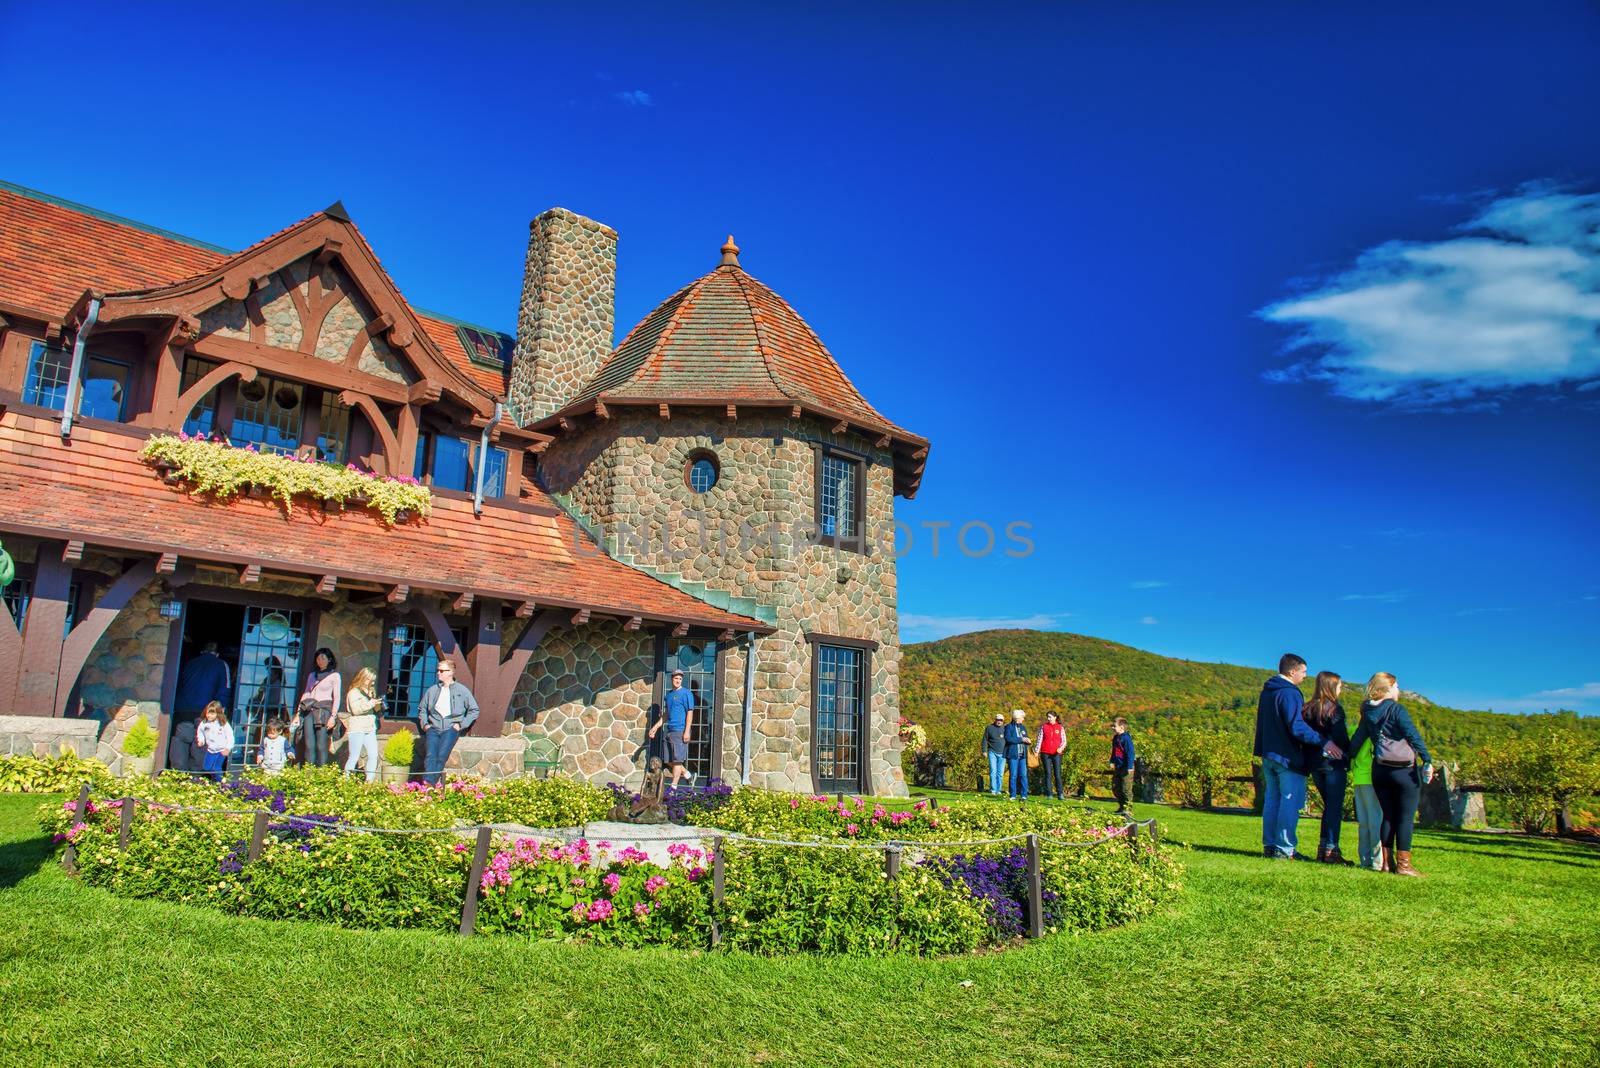 MOULTONBOROUGH, NH - OCTOBER 2015: Tourists visit Castle in the by jovannig